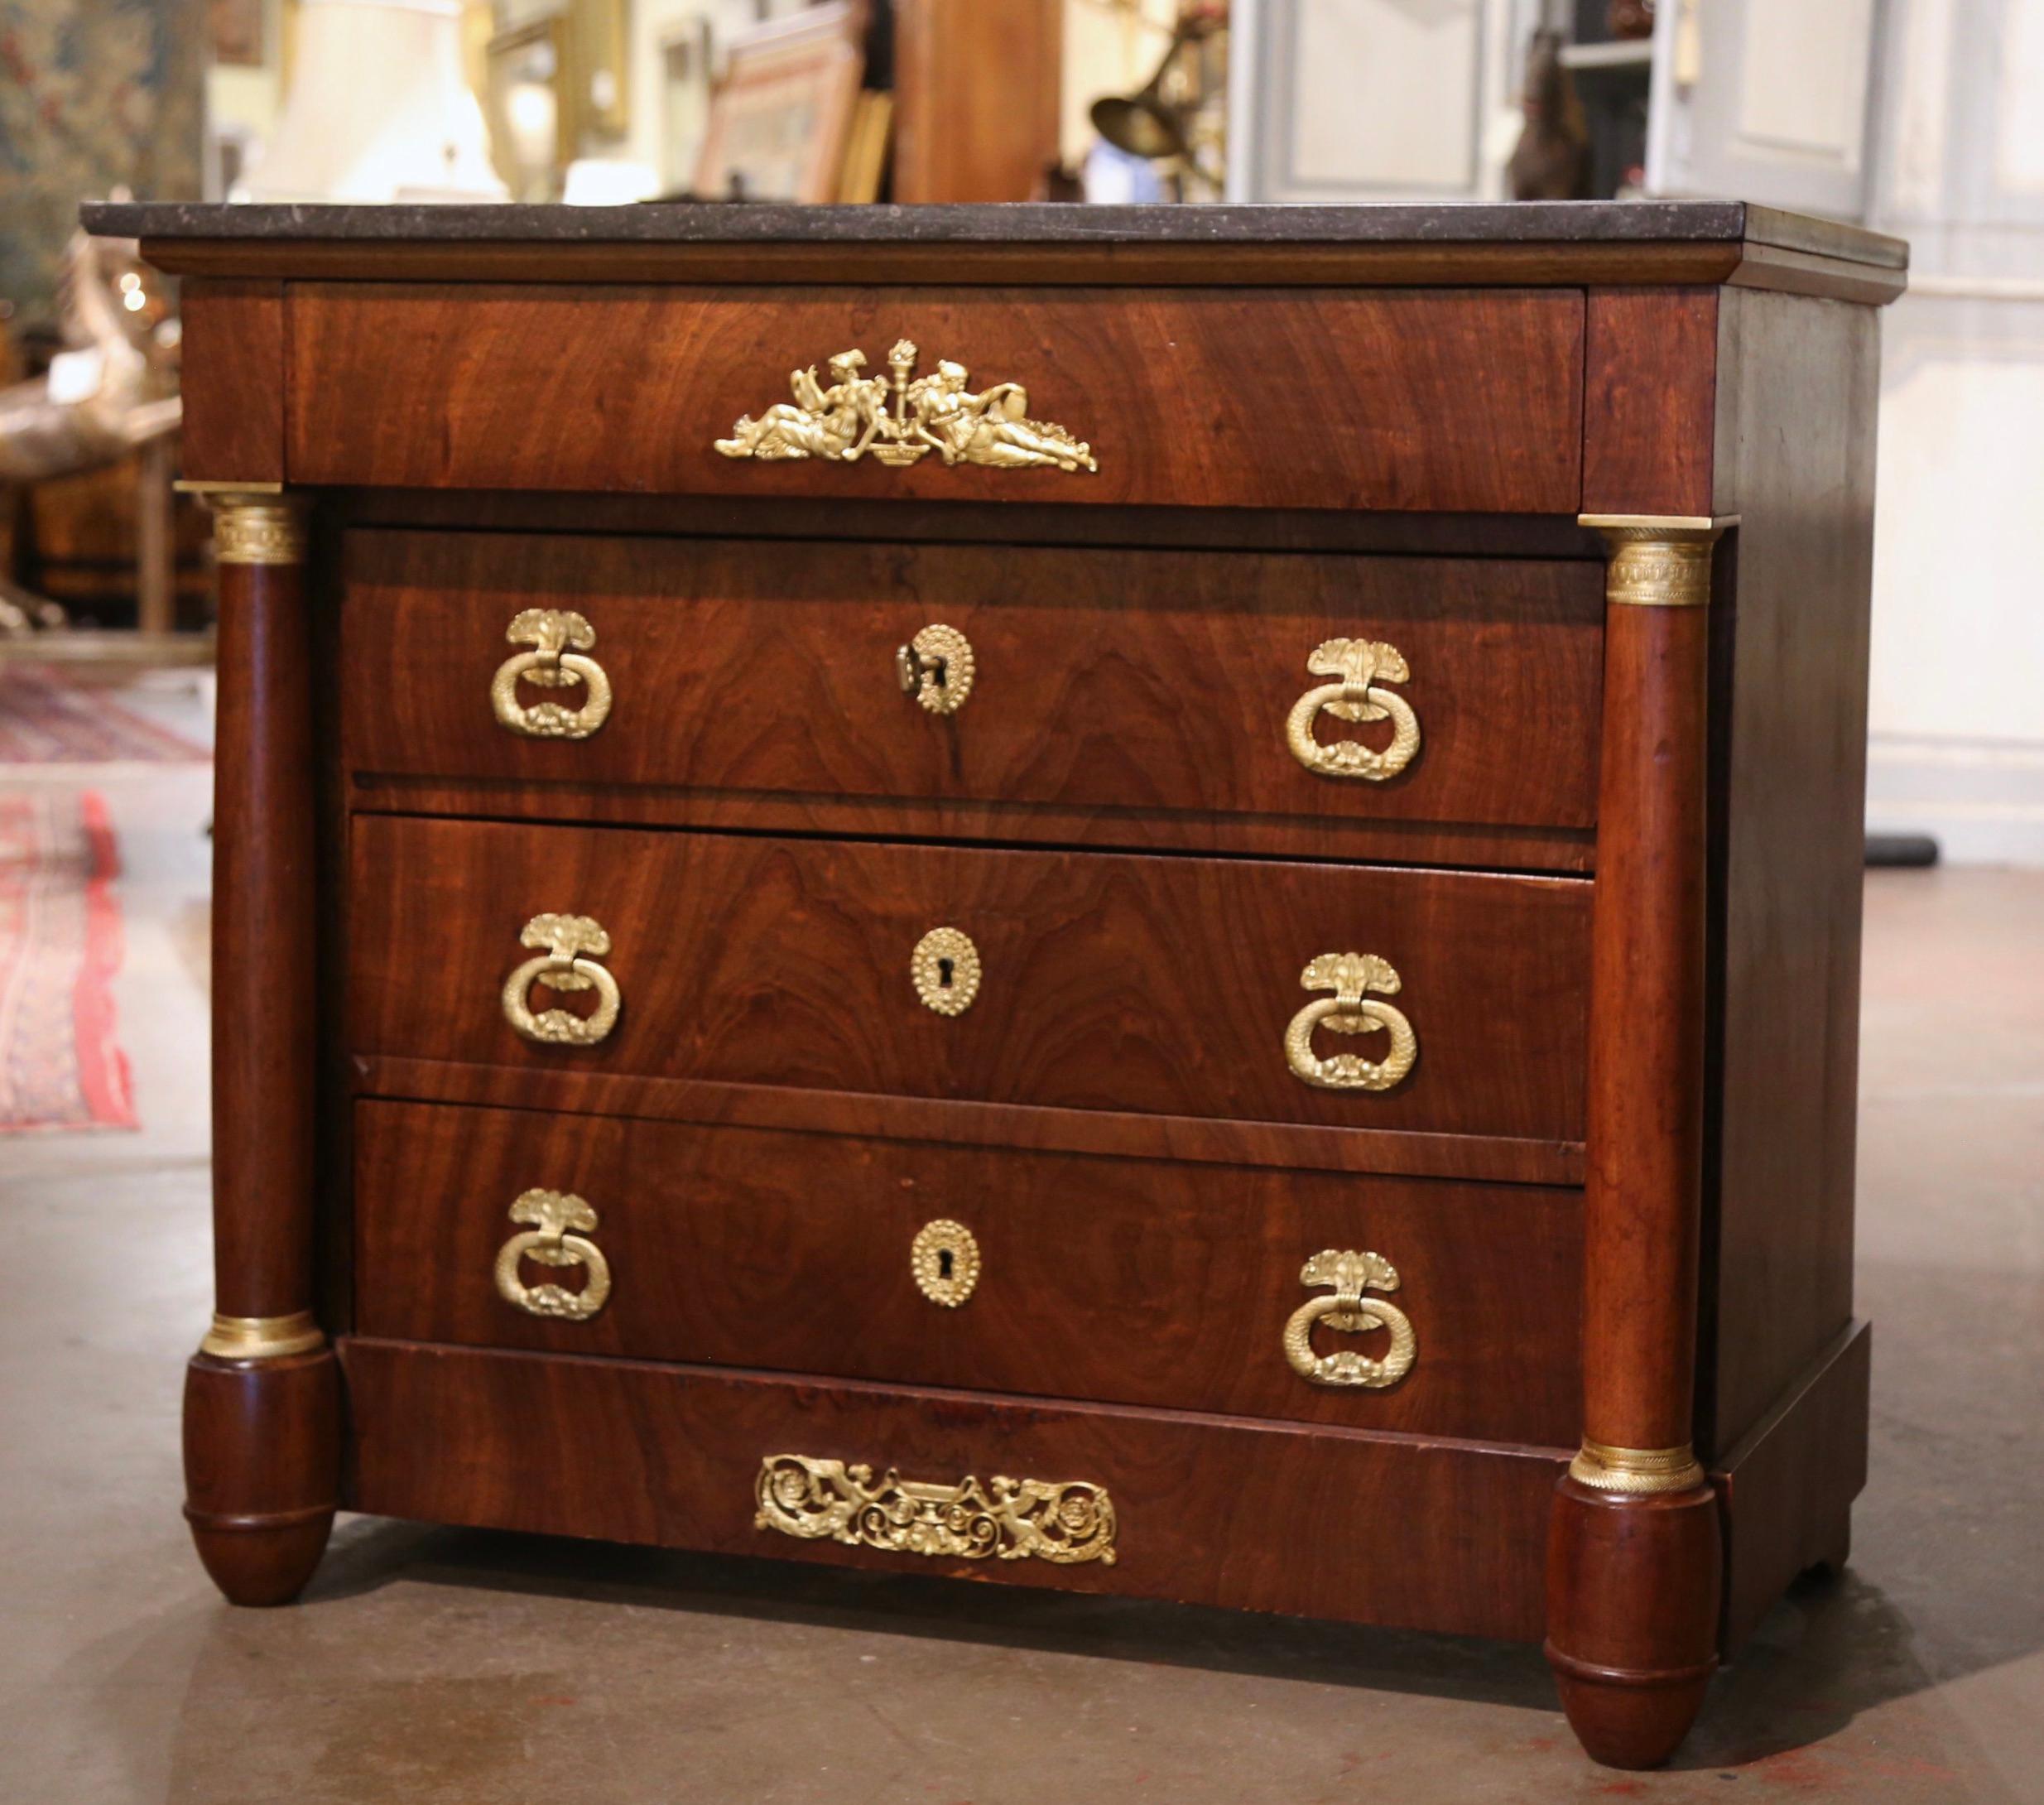 19th Century French Empire Marble Top Carved Chestnut & Ormolu Chest of Drawers For Sale 2